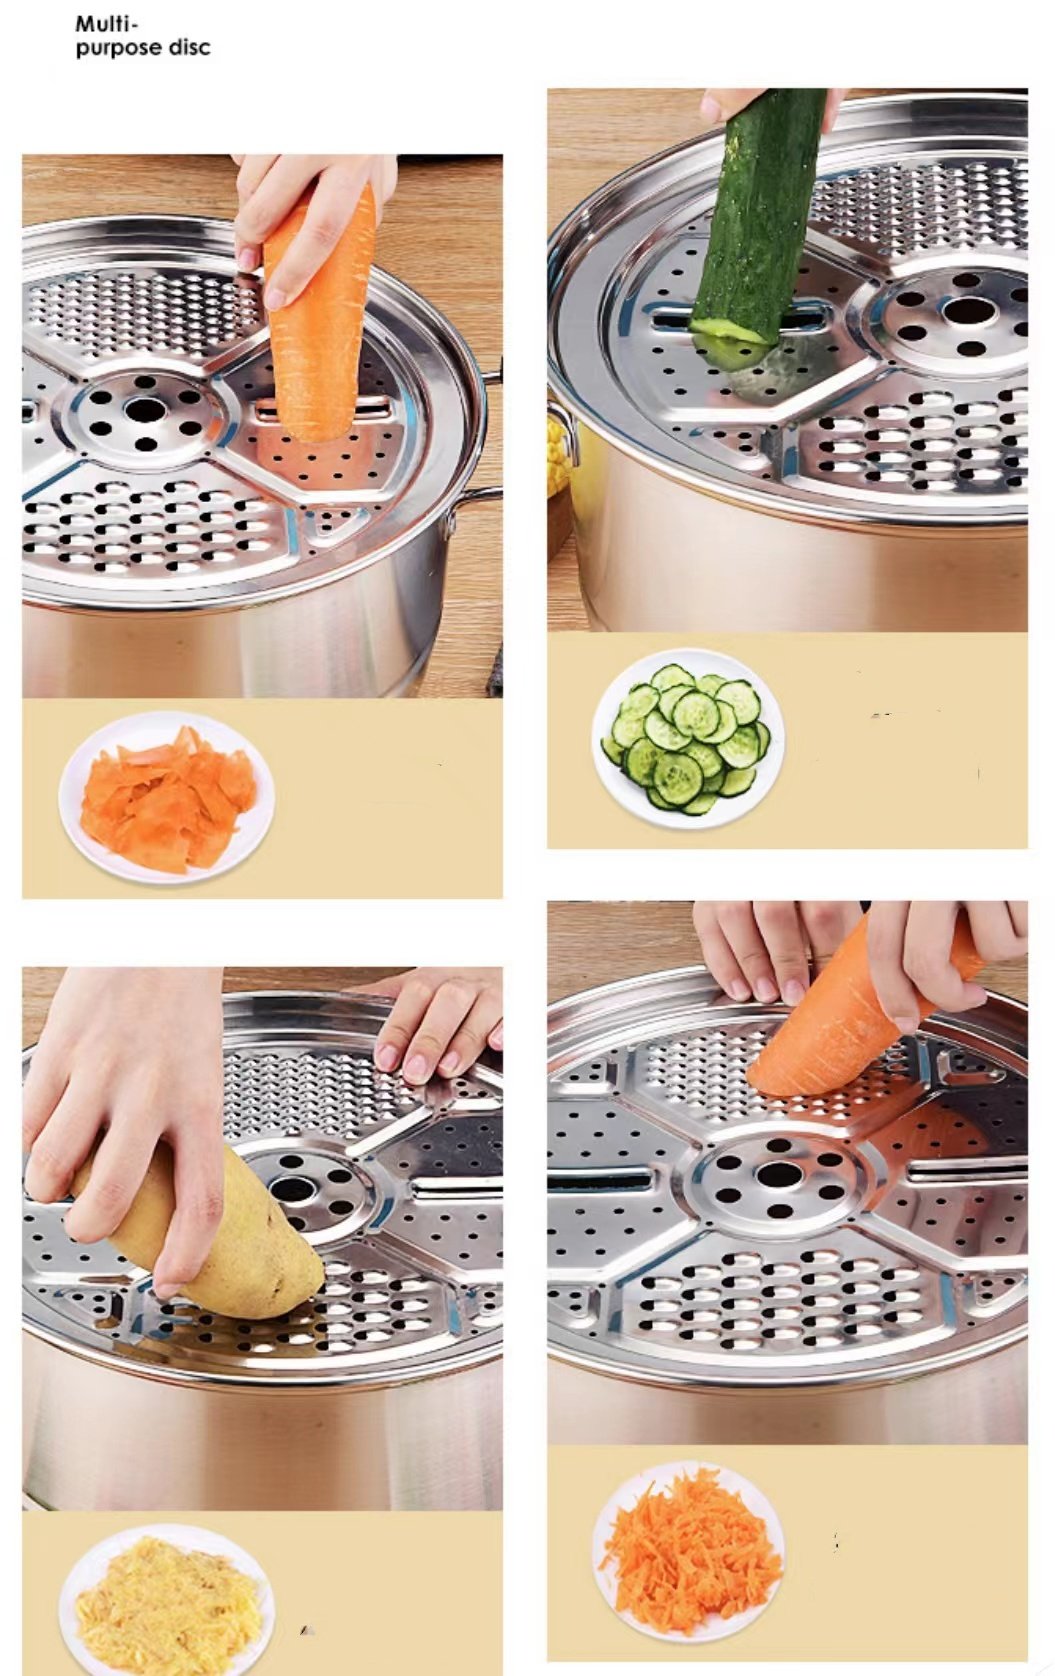 High Quality Multifunctional Double Cooking Steamer Stainless